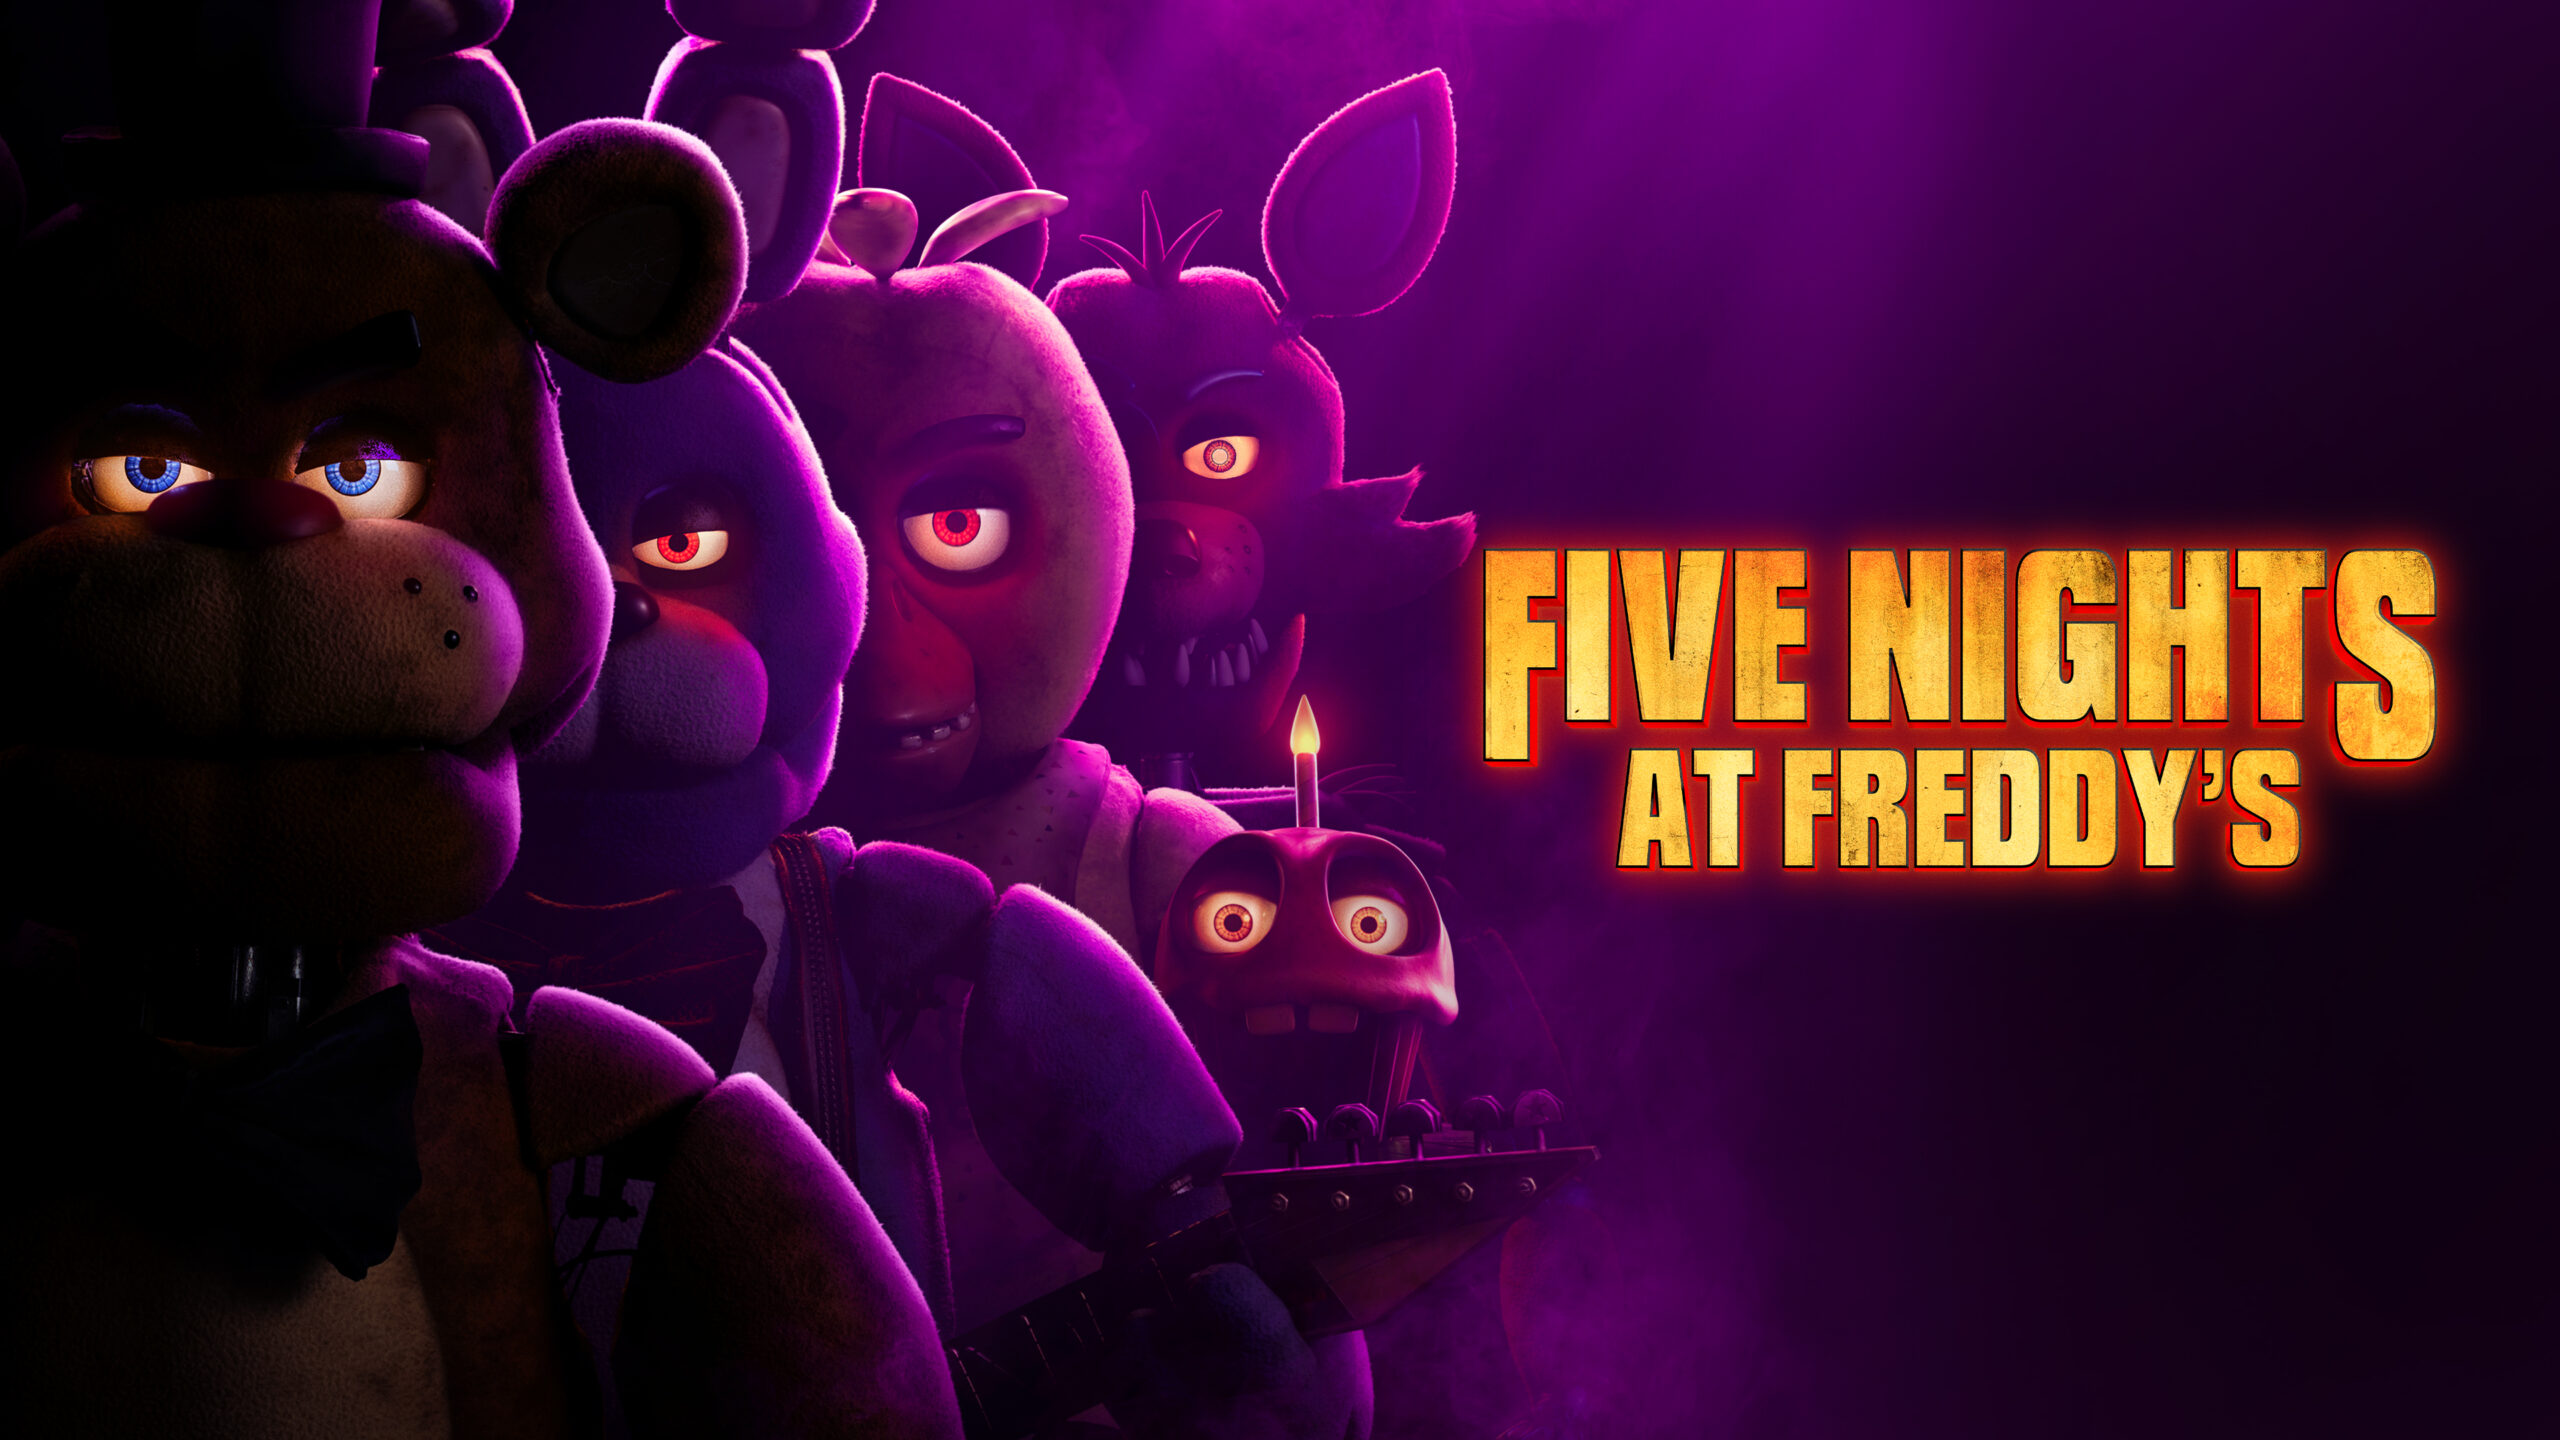 “Five Nights at Freddy’s”